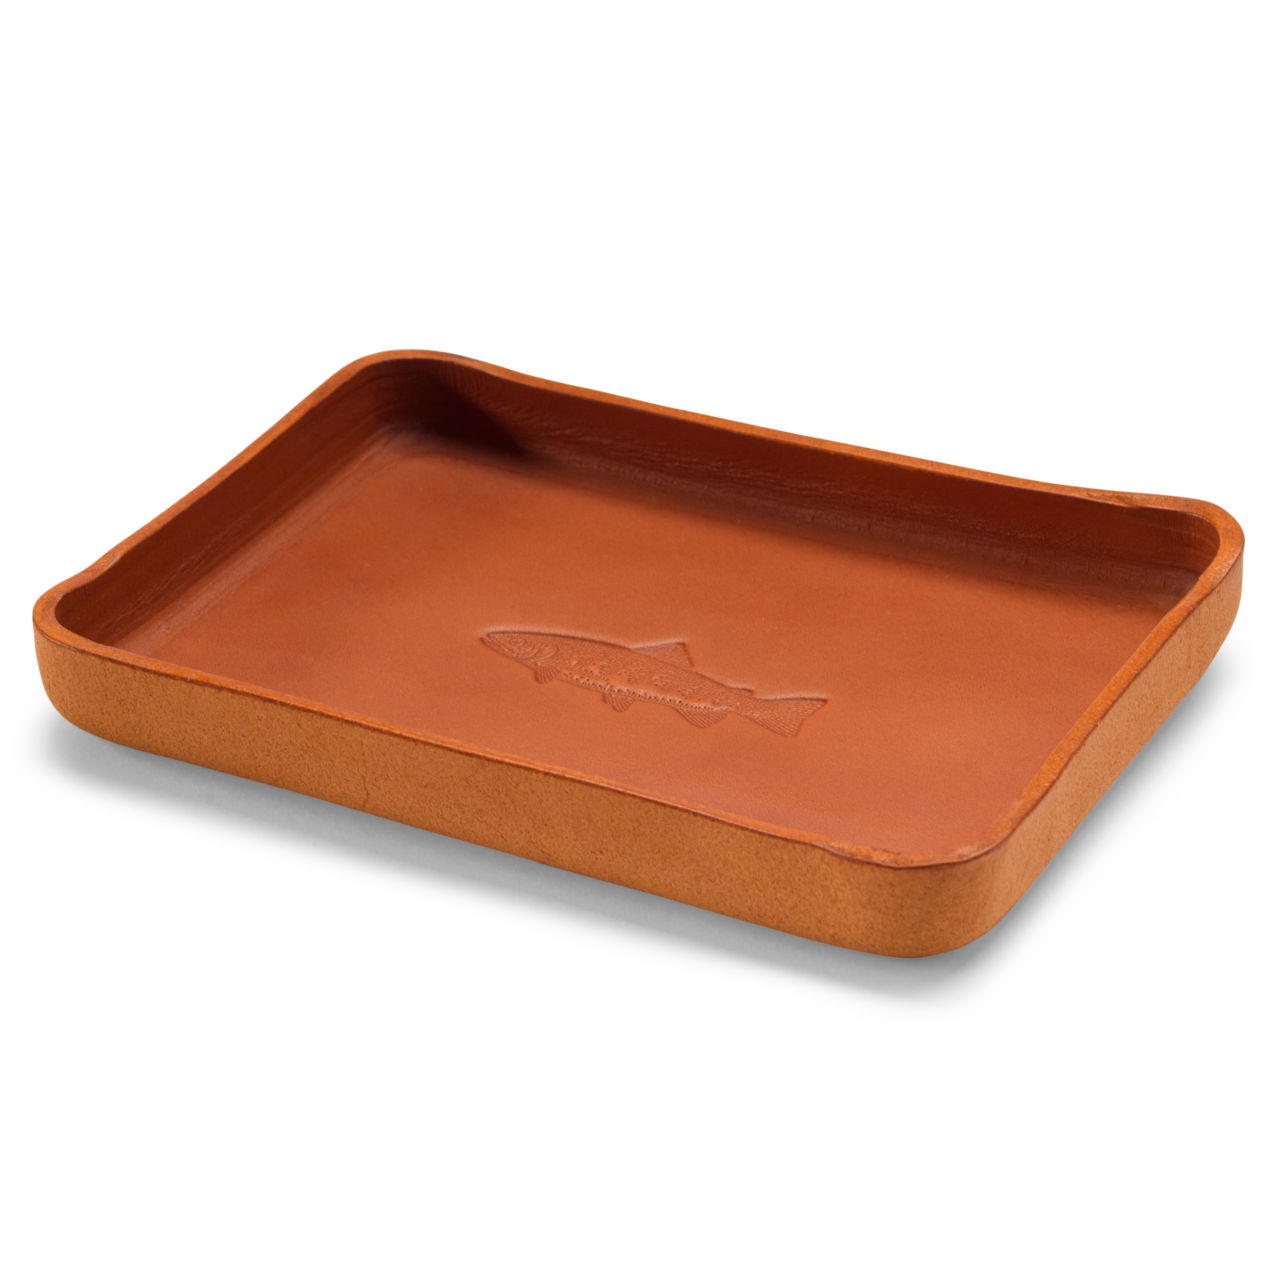 Leather Desktop Tray with Fish -  image number 0